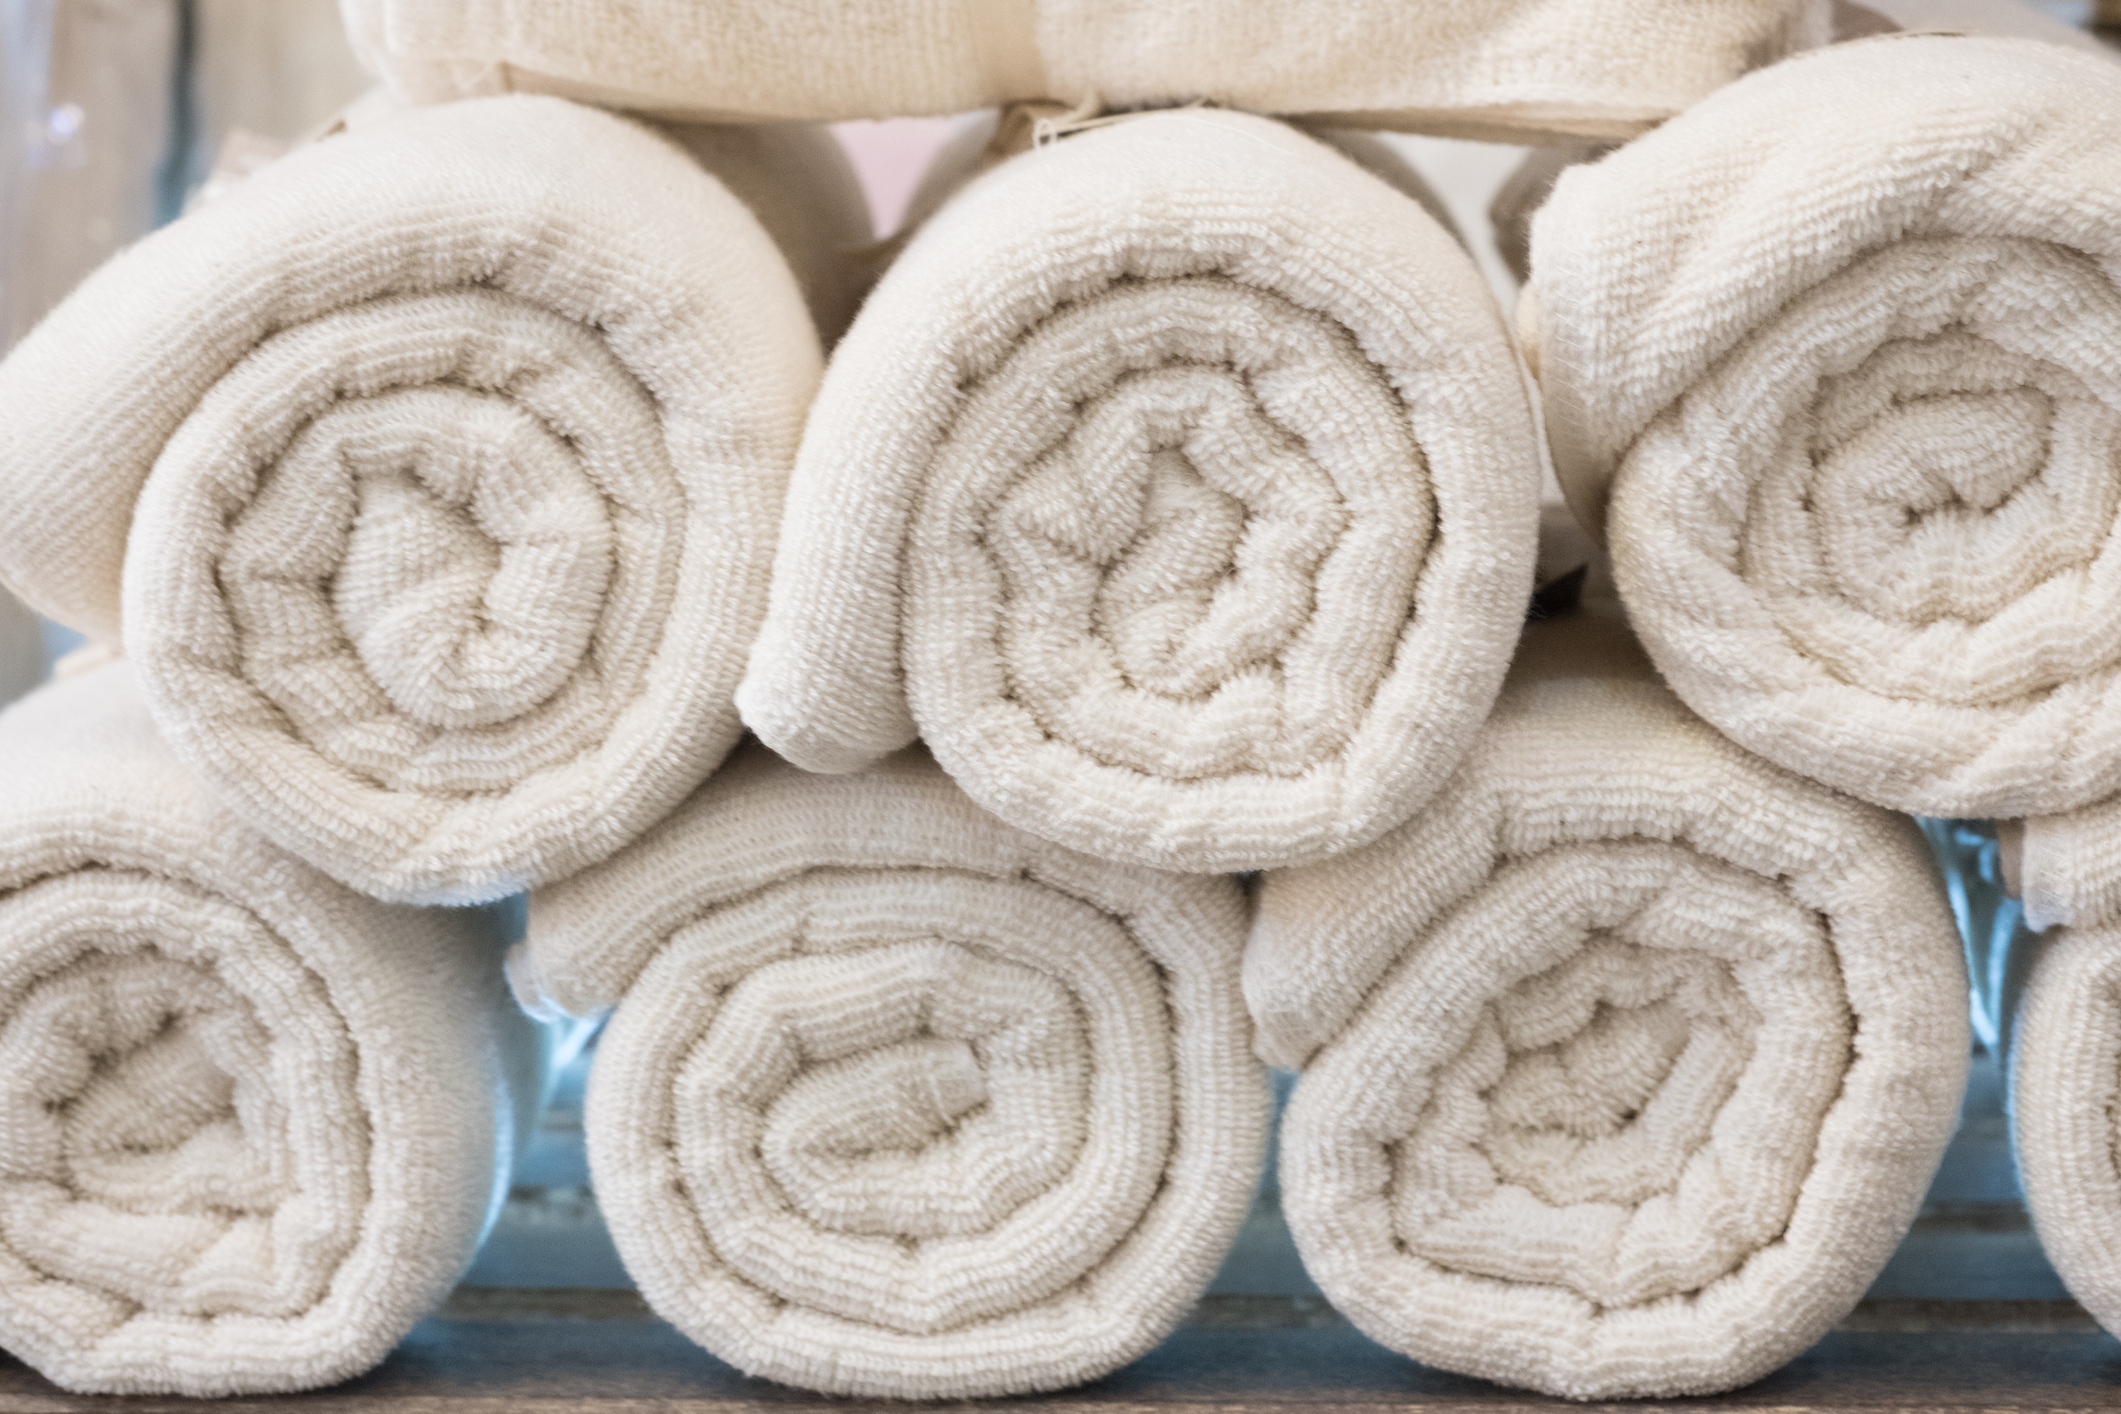 How To Keep Your Towels Fluffy, Soft & Absorbent [Laundry Tips